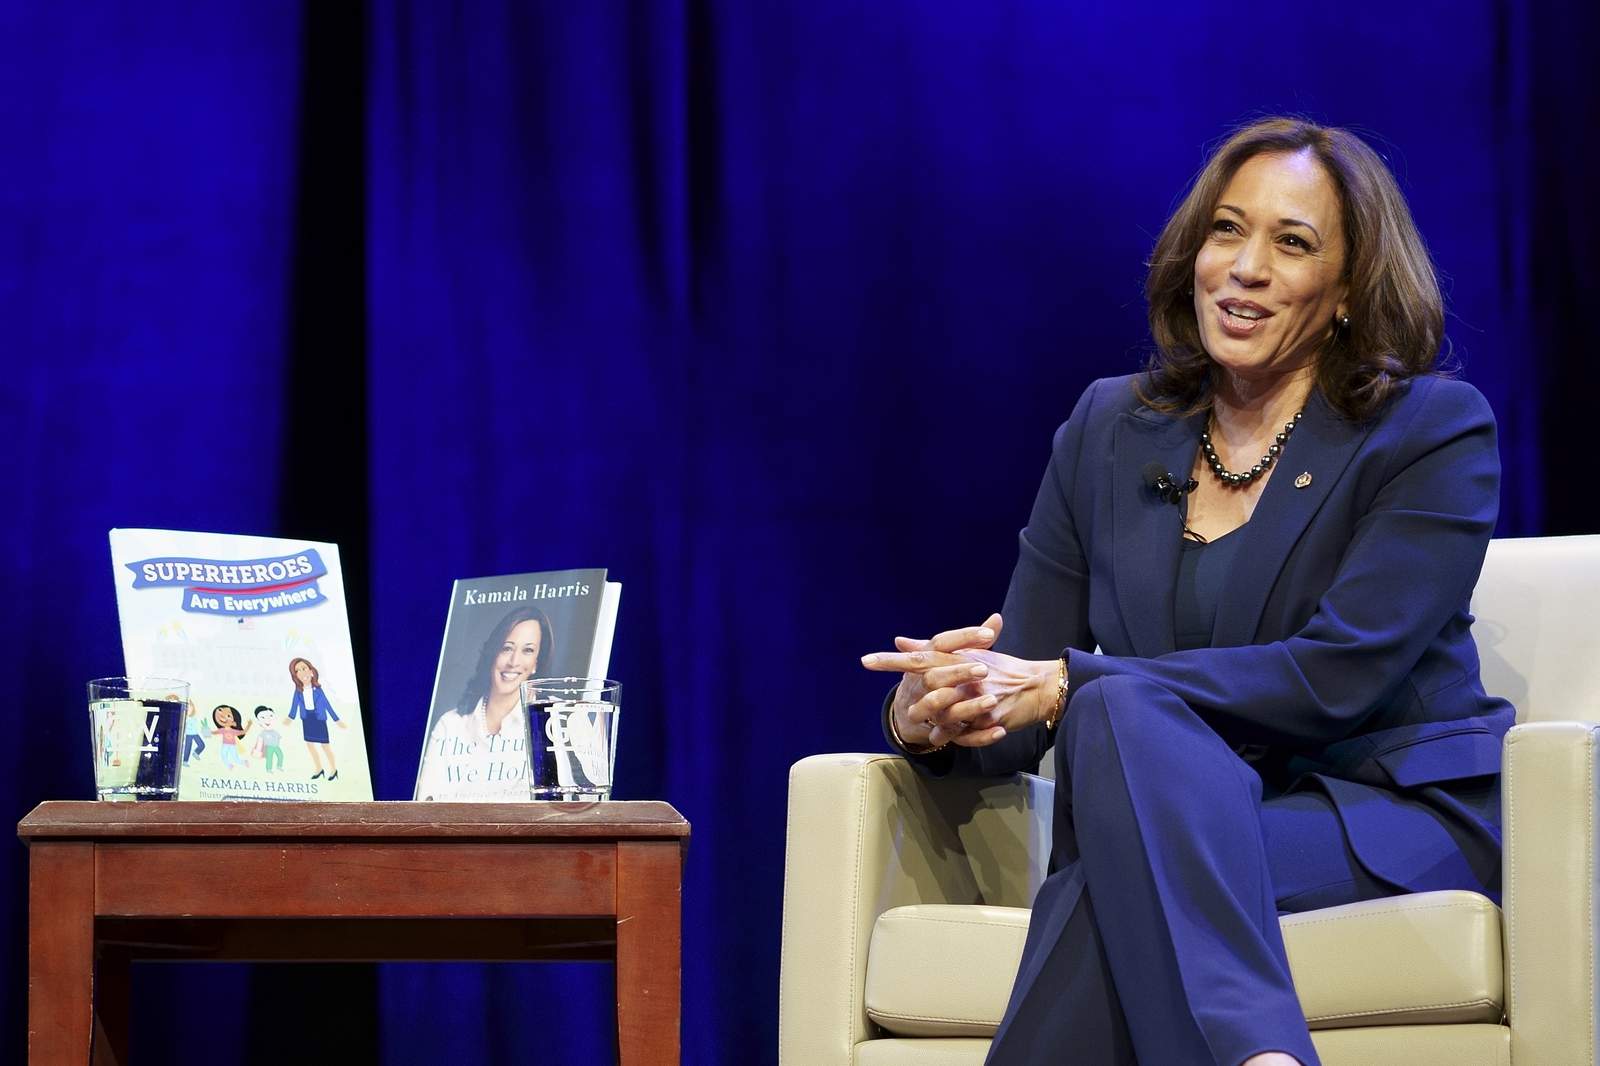 Kamala Harris books surge in popularity after election